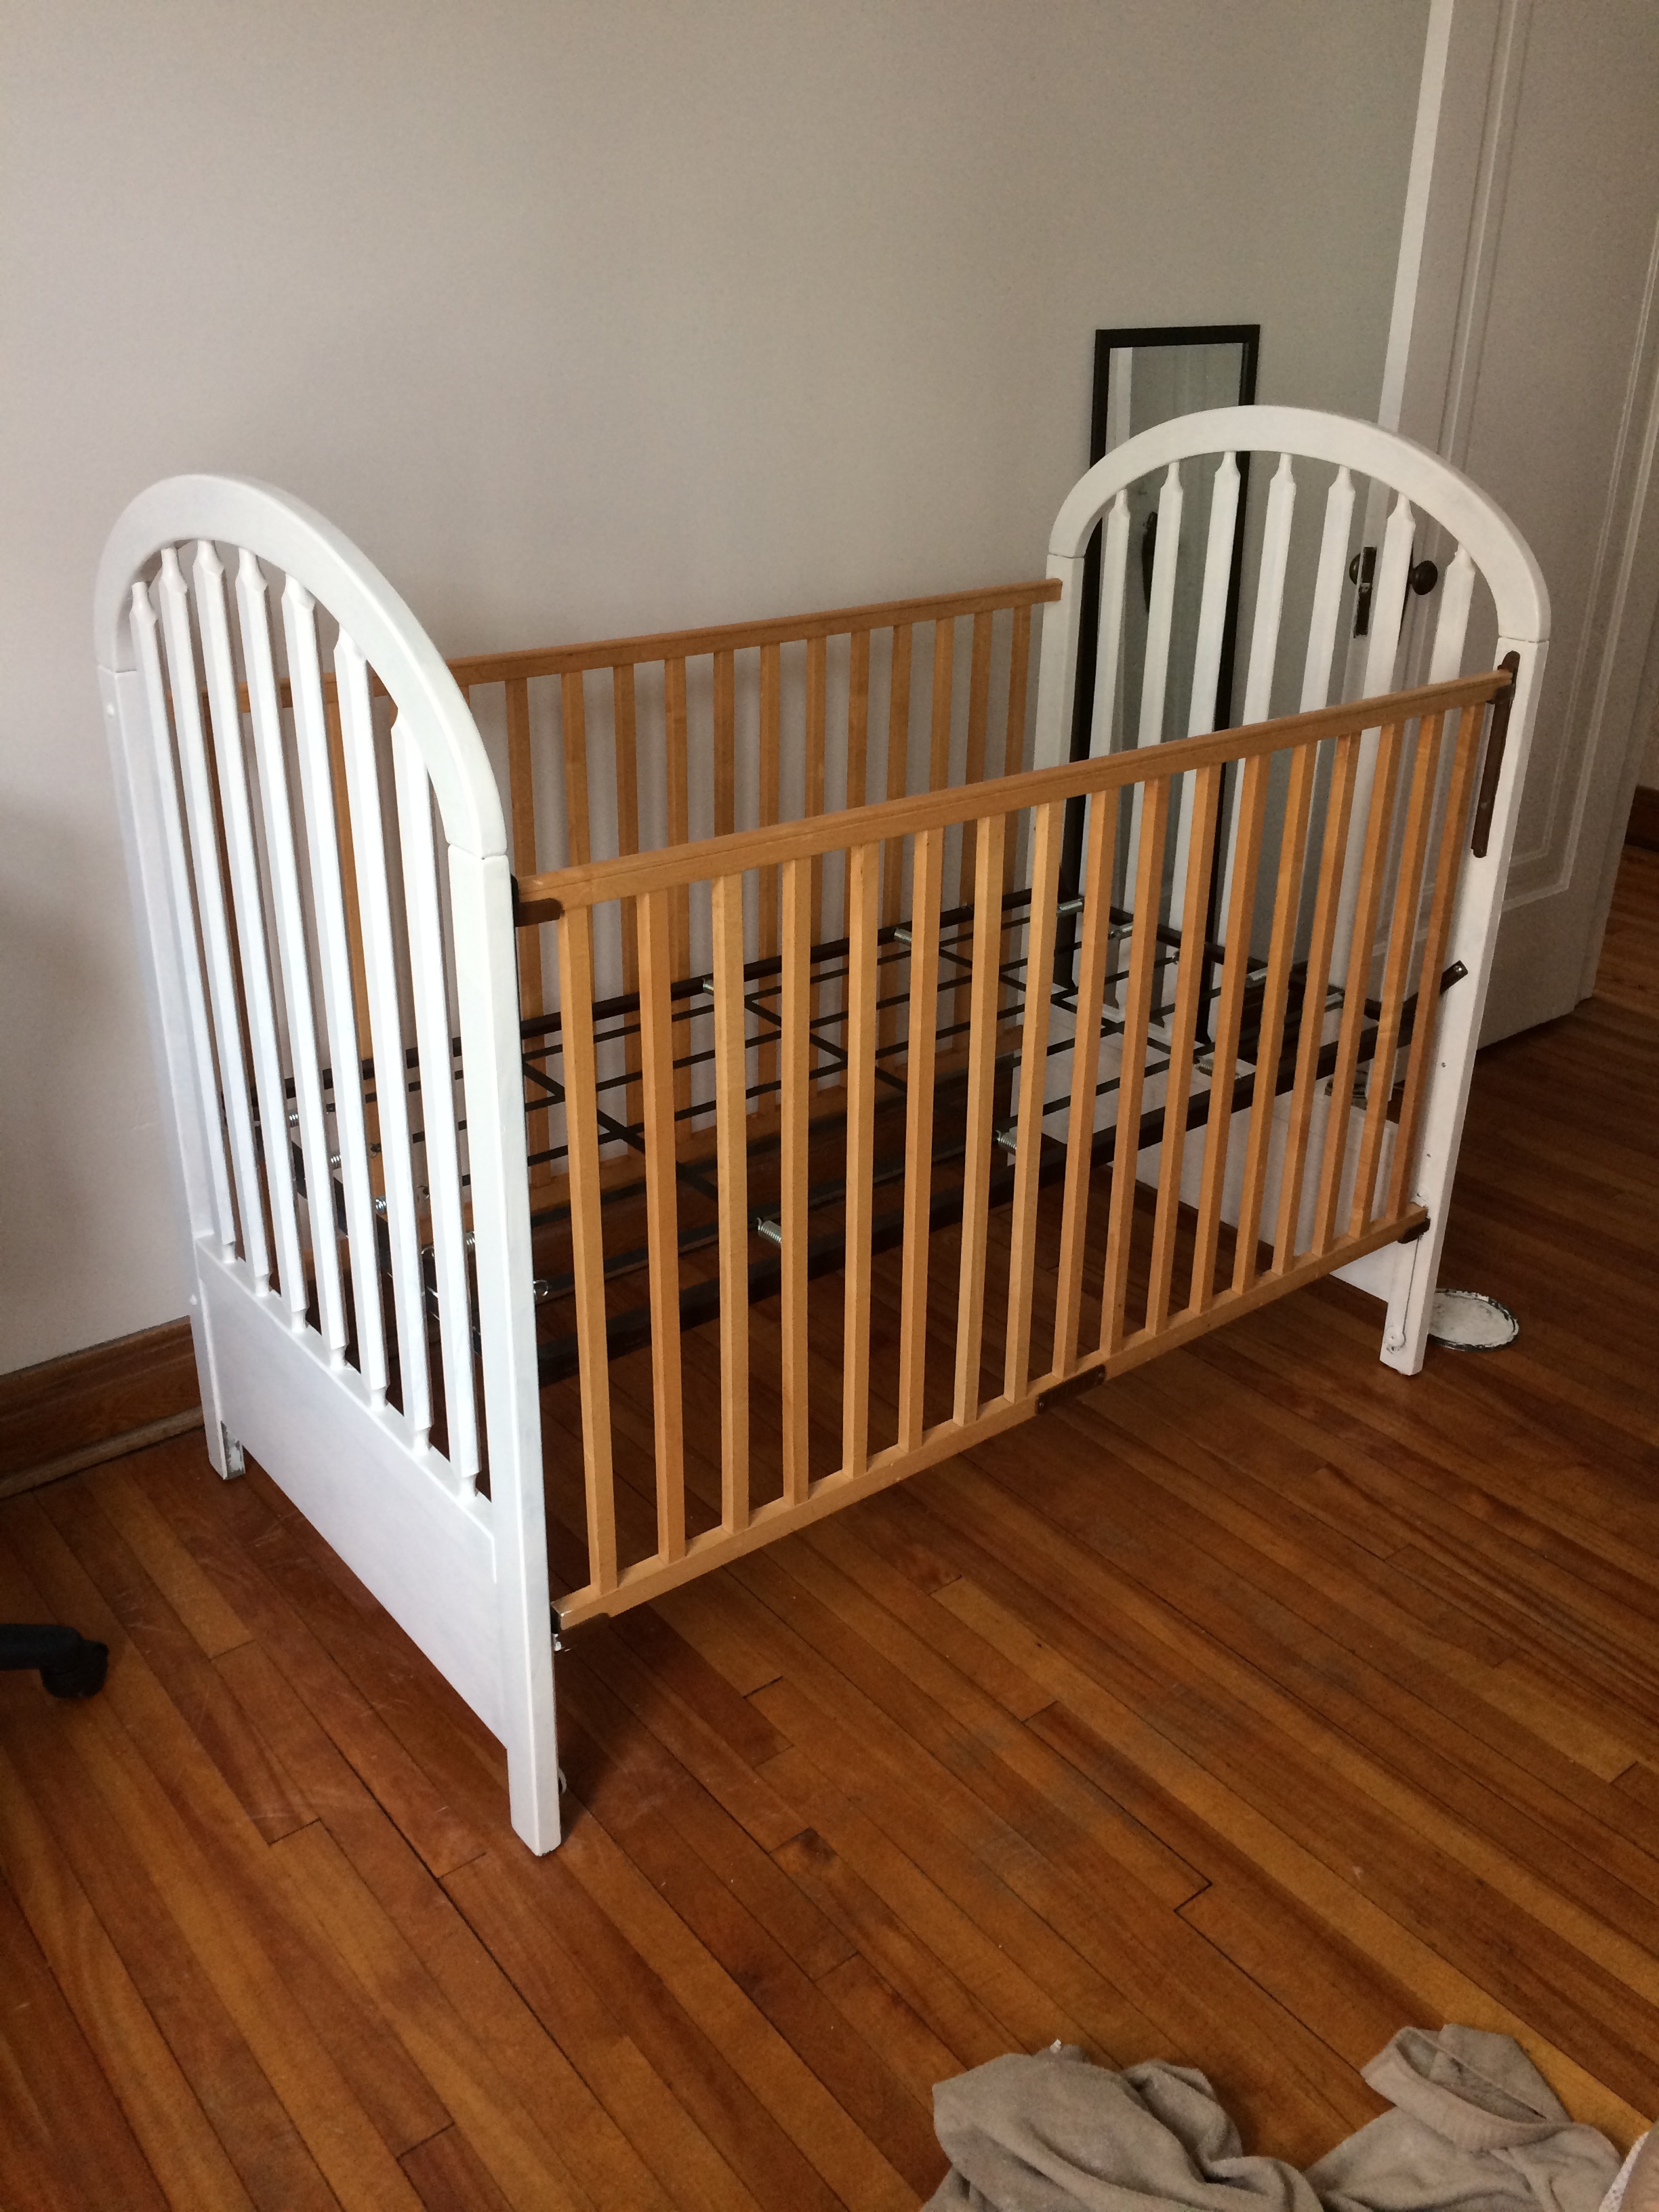 Baby room: Crib after